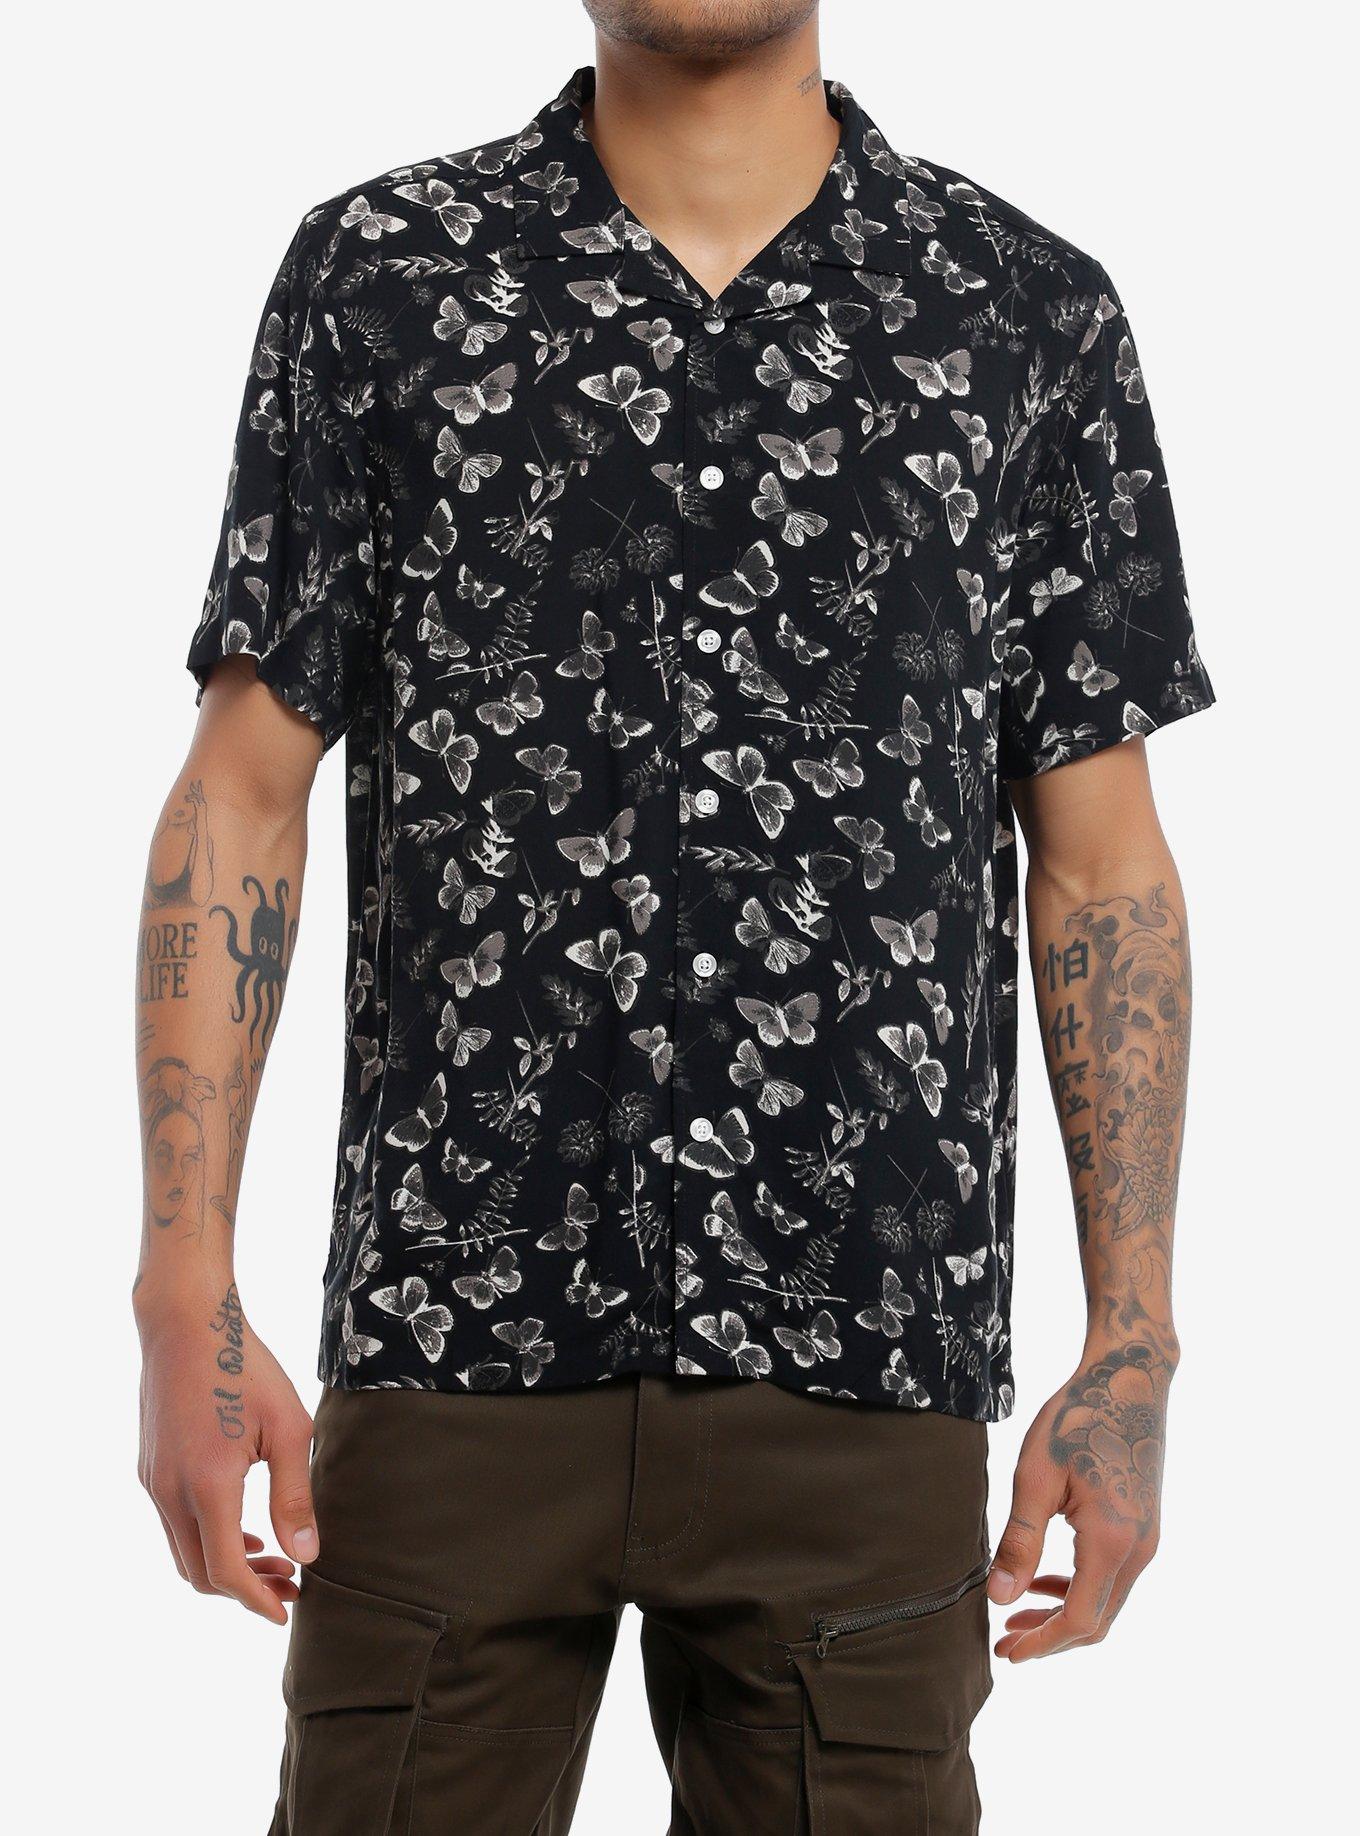 Social Collision Dark Butterfly Woven Button-Up, OLIVE, hi-res